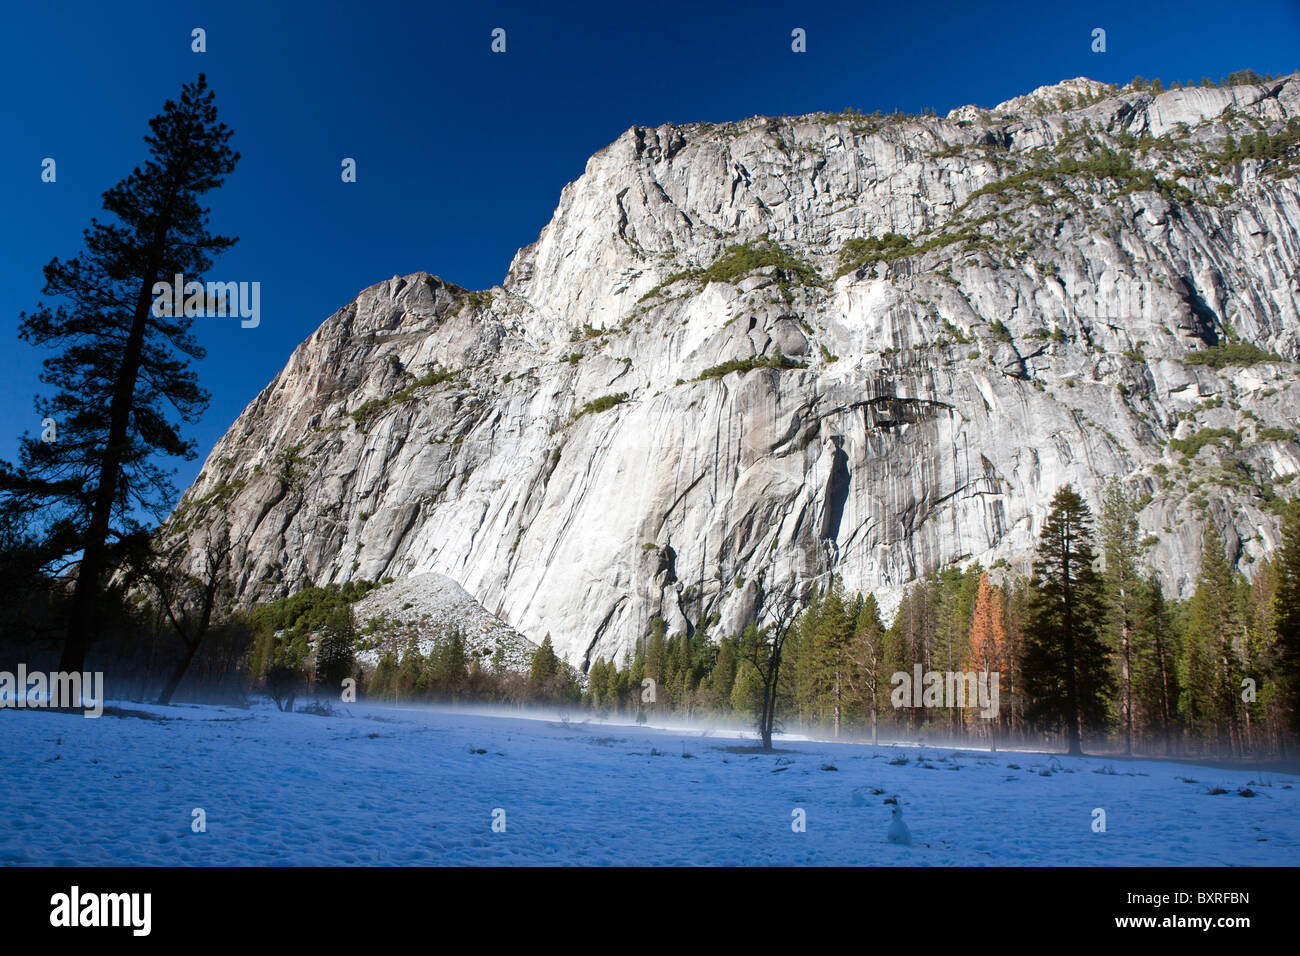 Valley floor covered in snow with evergreen trees, Yosemite National Park, California, United States of America Stock Photo